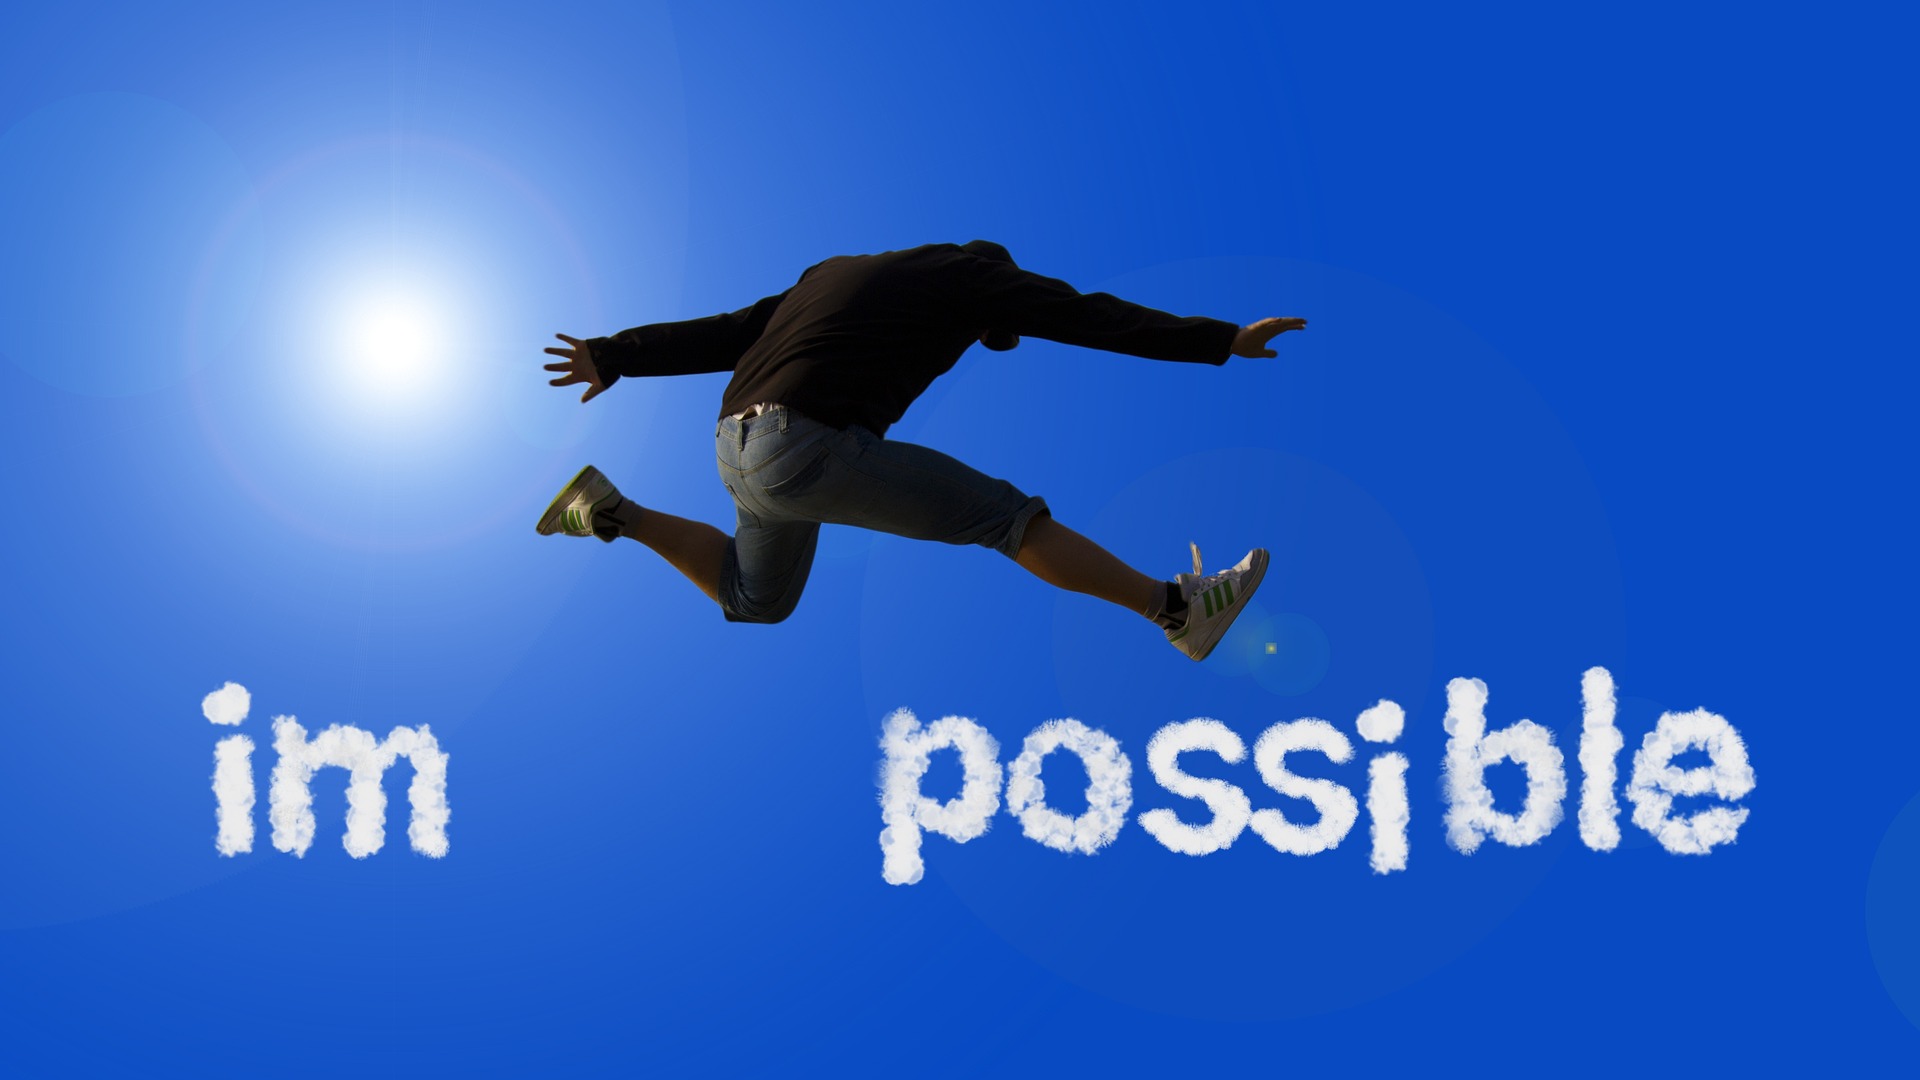 "I'm possible" word with jumping person above